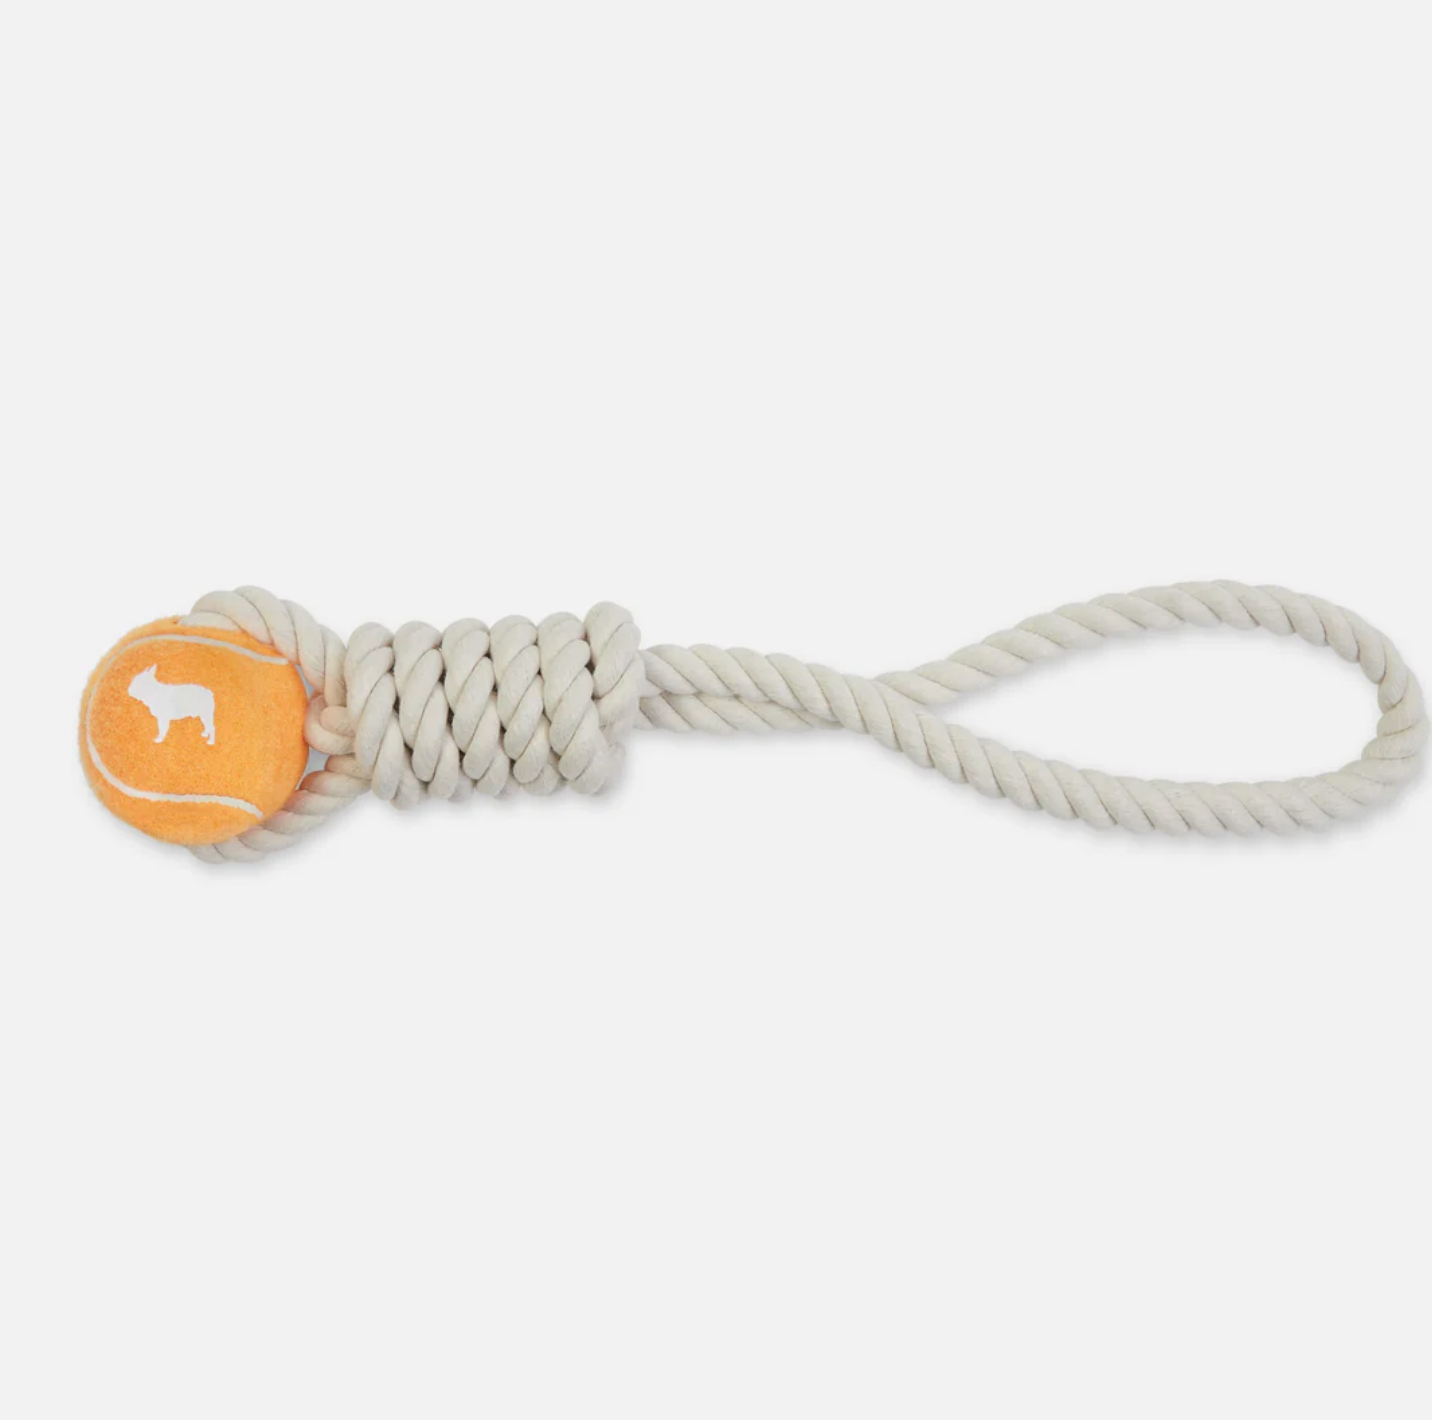 Tennis Ball and Rope Tug Toy